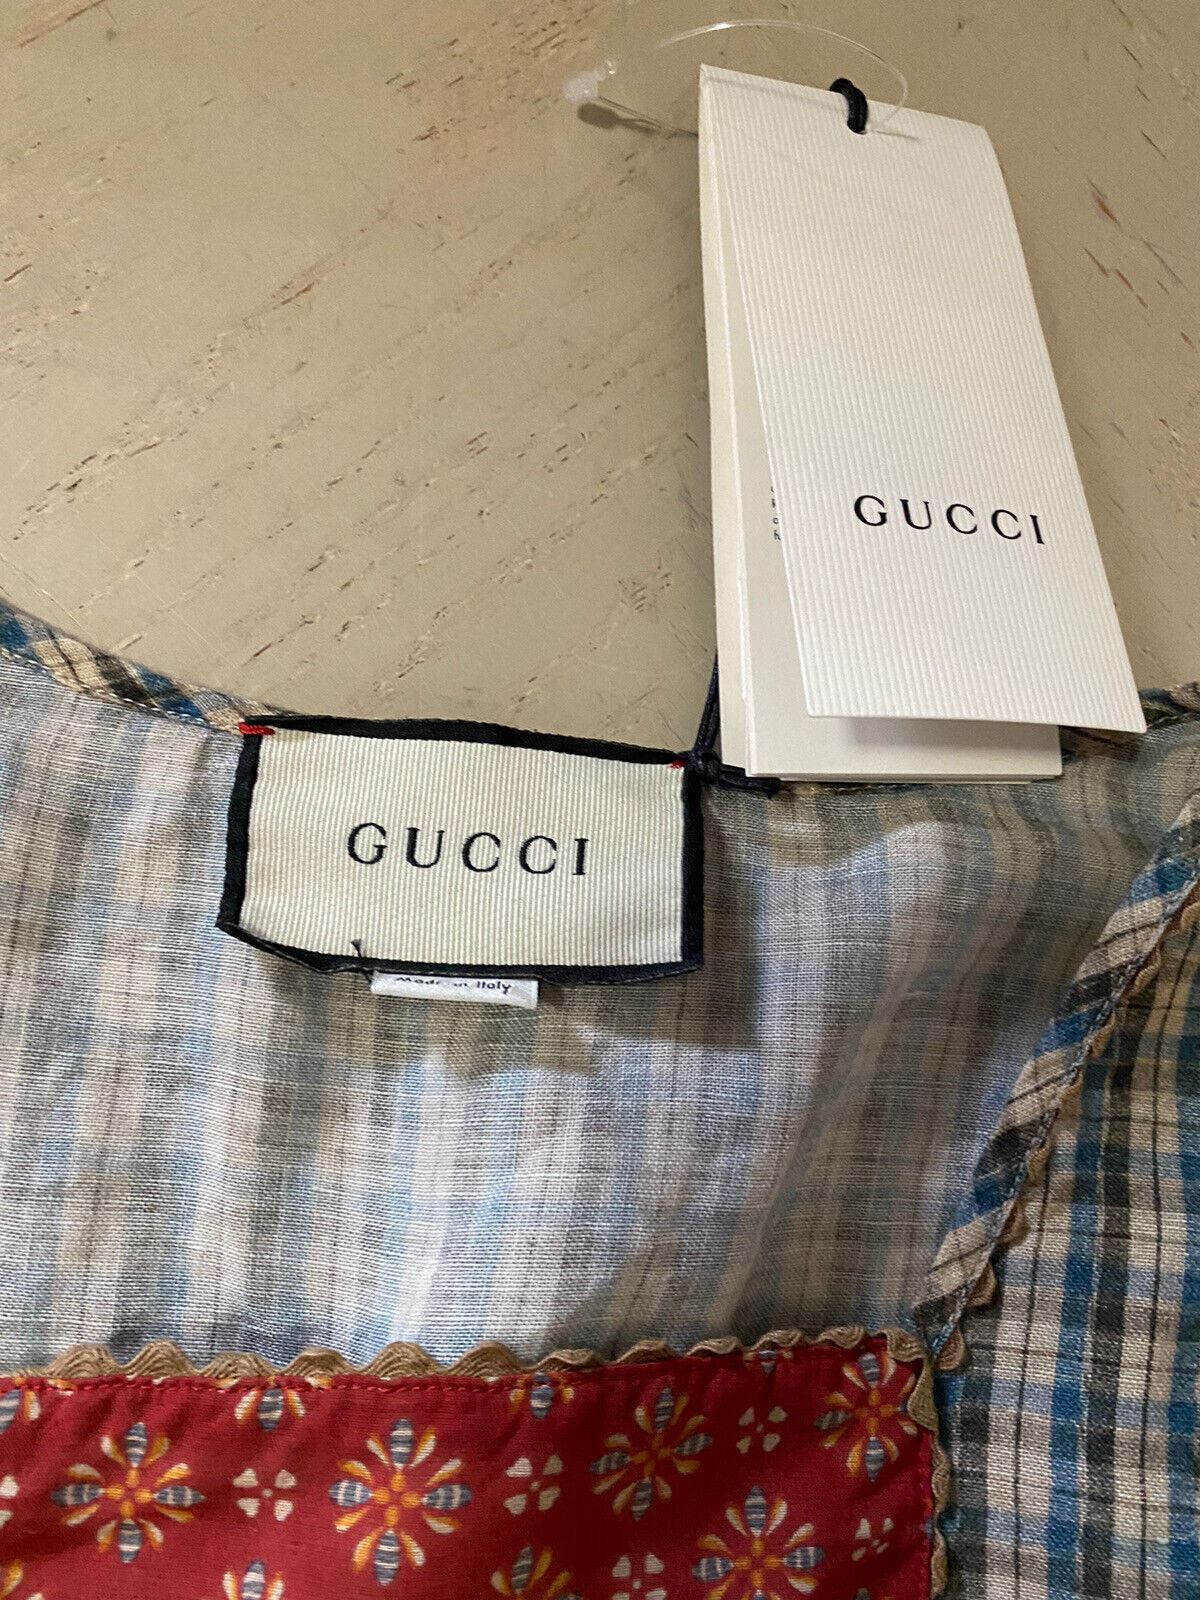 New $1200 Gucci Country Check Shirt Blue/Red/Green Size 46 Eu Italy